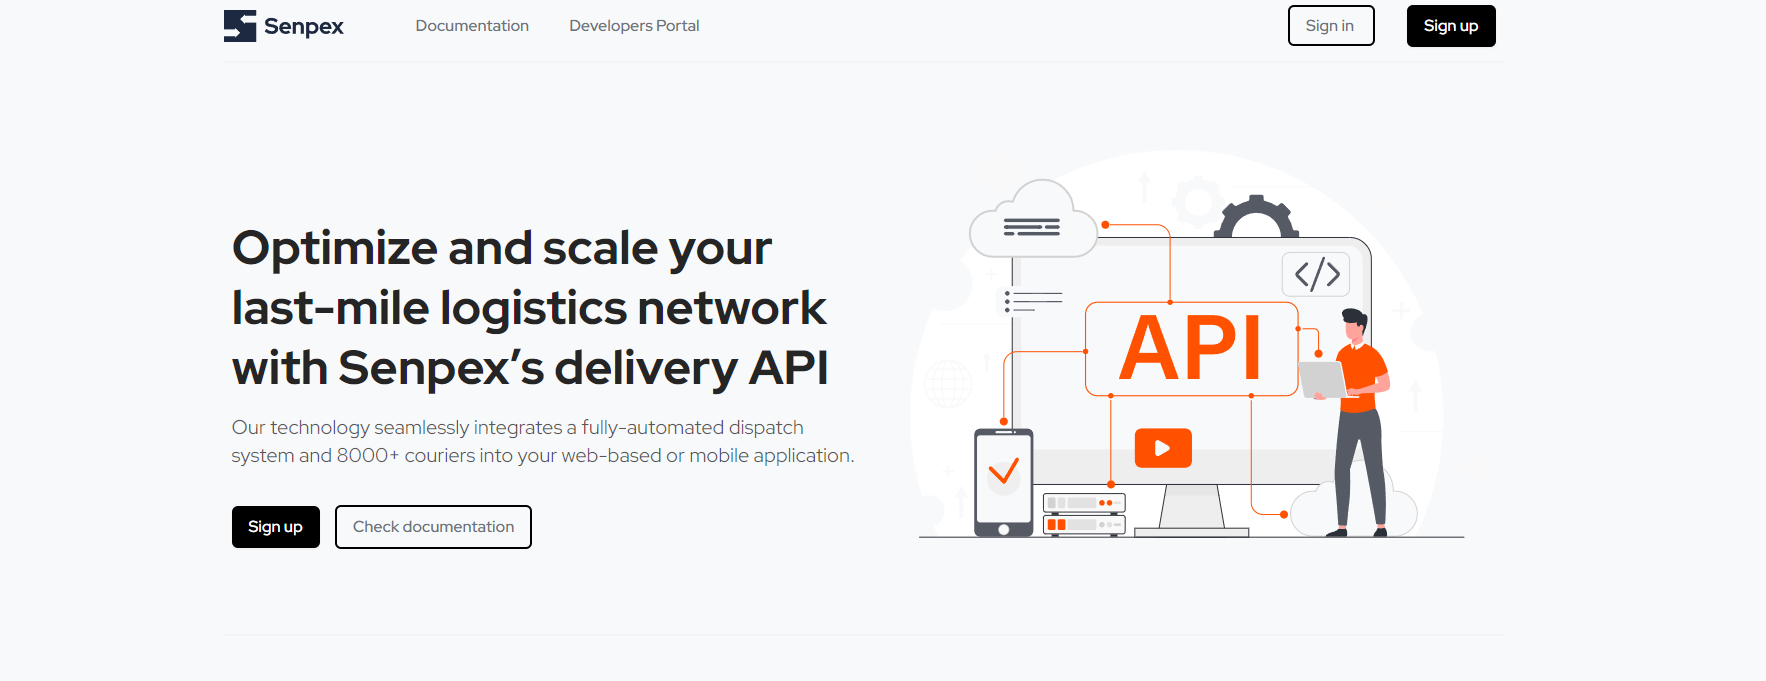 Senpex Launches API to Help Businesses Optimize and Scale Their Last-Mile Logistics Networks